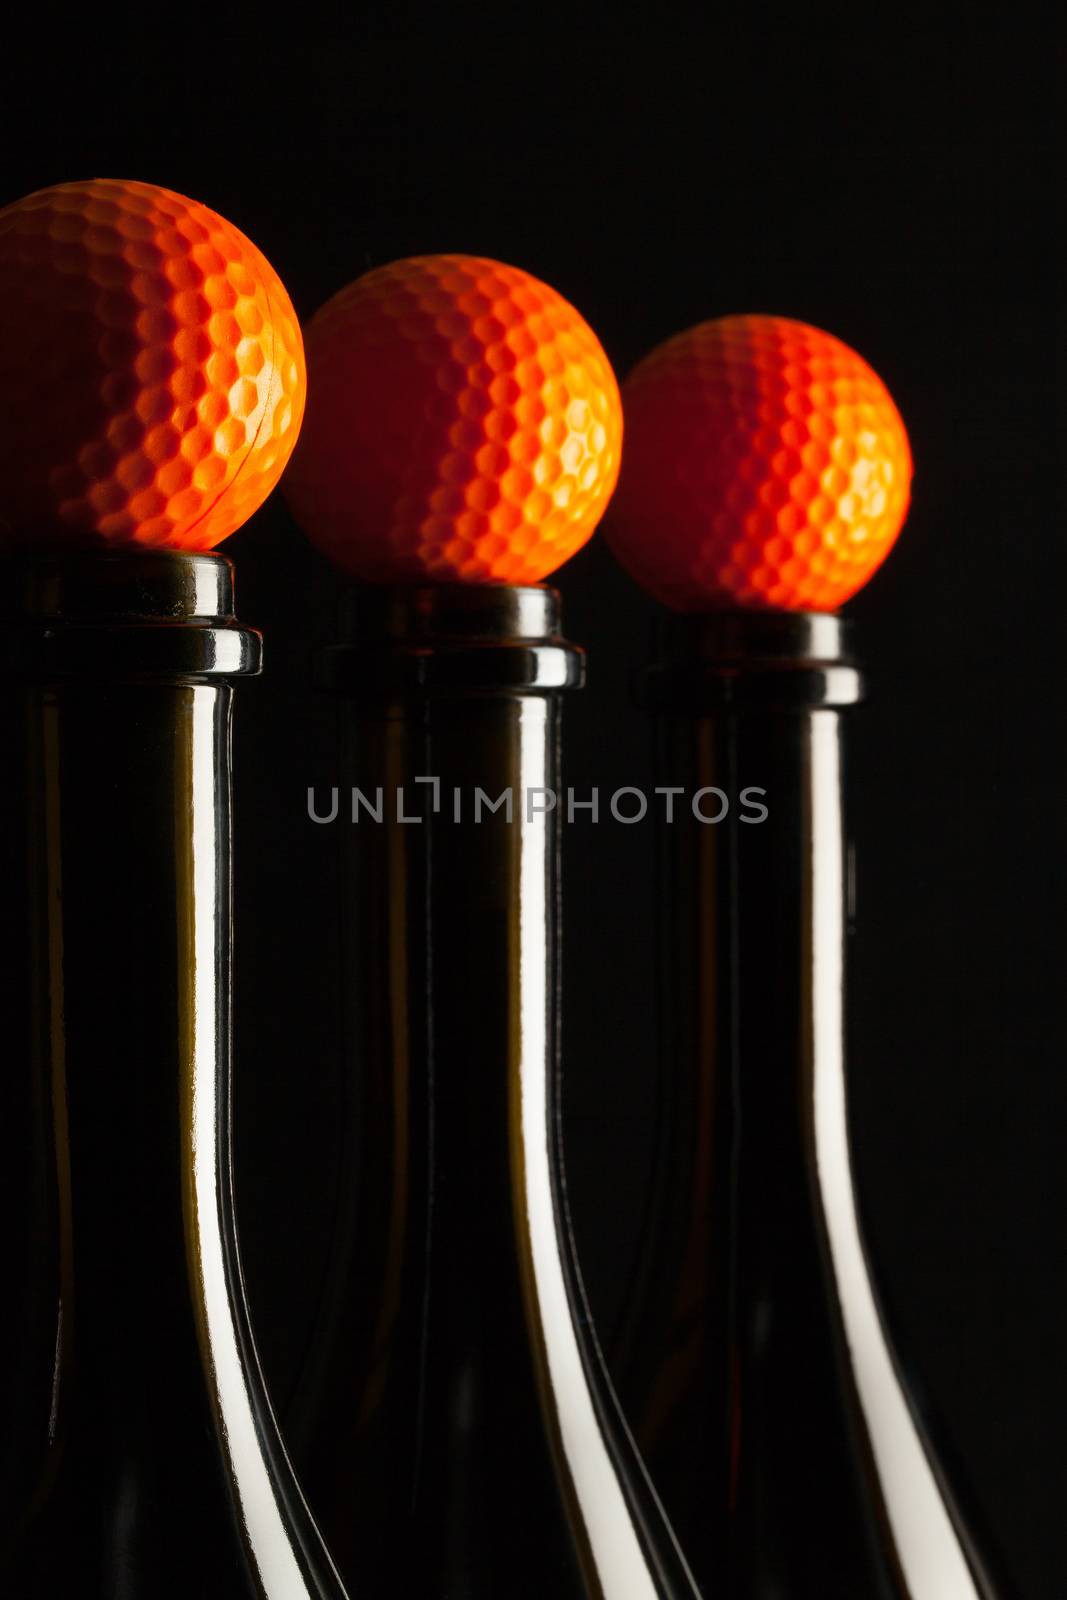 Silhouettes of elegant wine bottles with golf balls on a black background